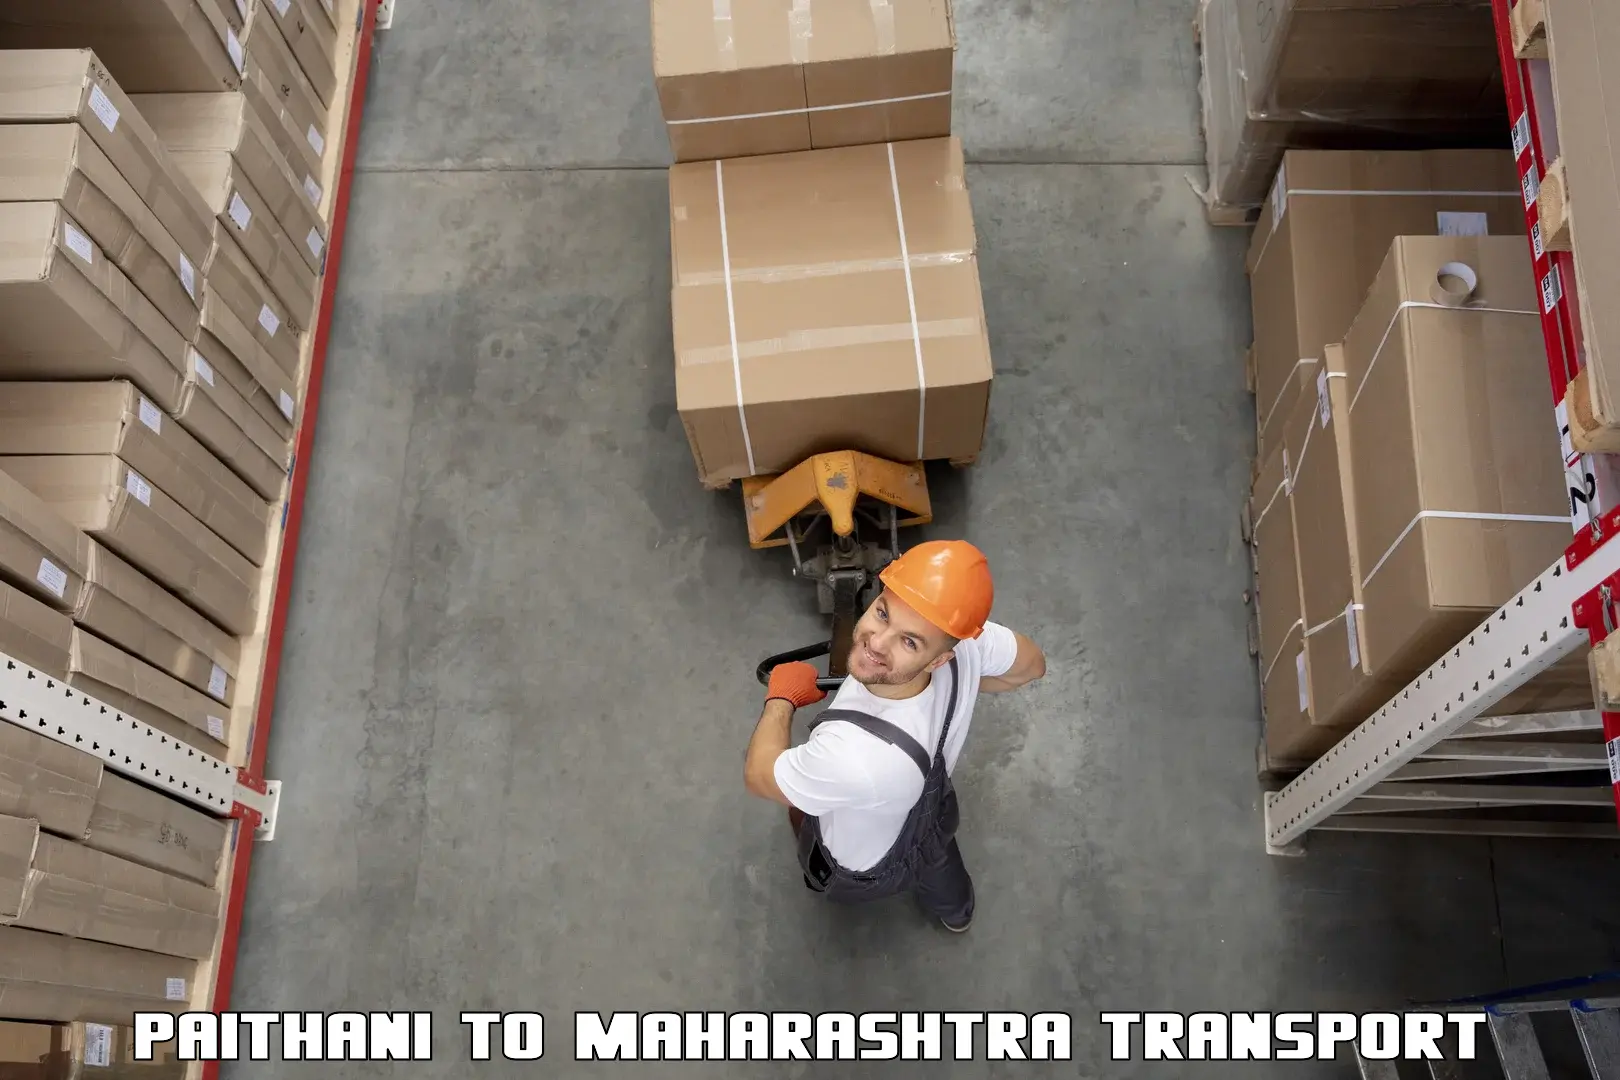 Container transport service Paithani to Chinchbunder